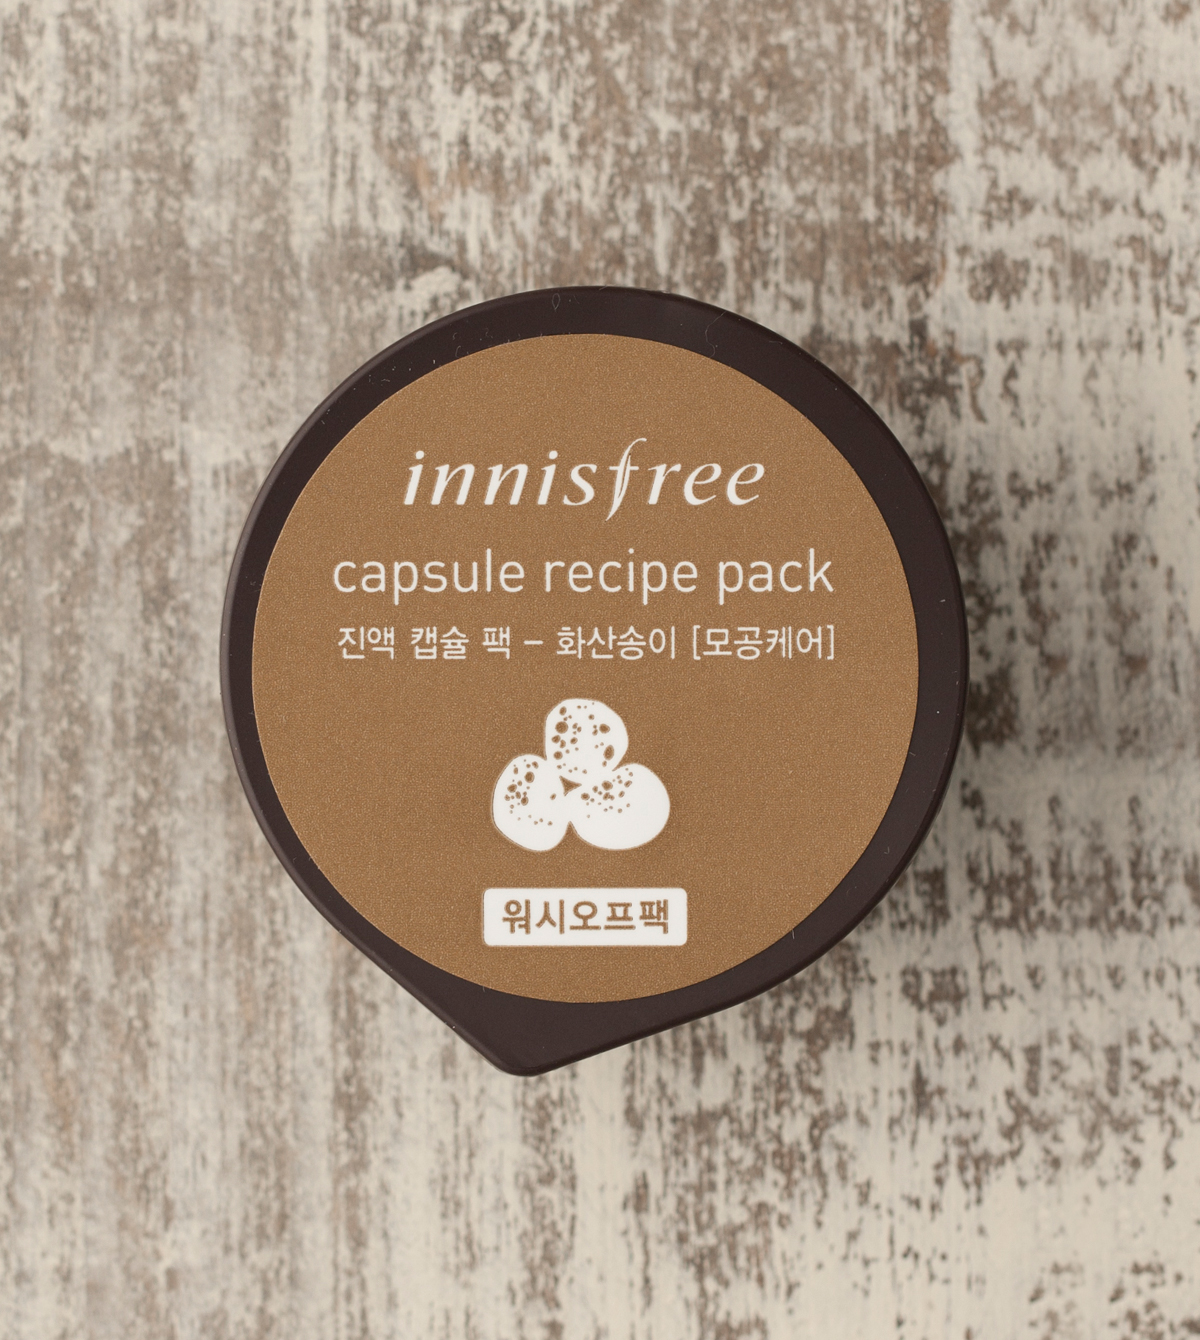 Innisfree Capsule Recipe Pack Volcanic Clay - Oily Skin Care - 14 Best Moisturizers, Fairness Creams, Lotion & Gels for Oily Skin